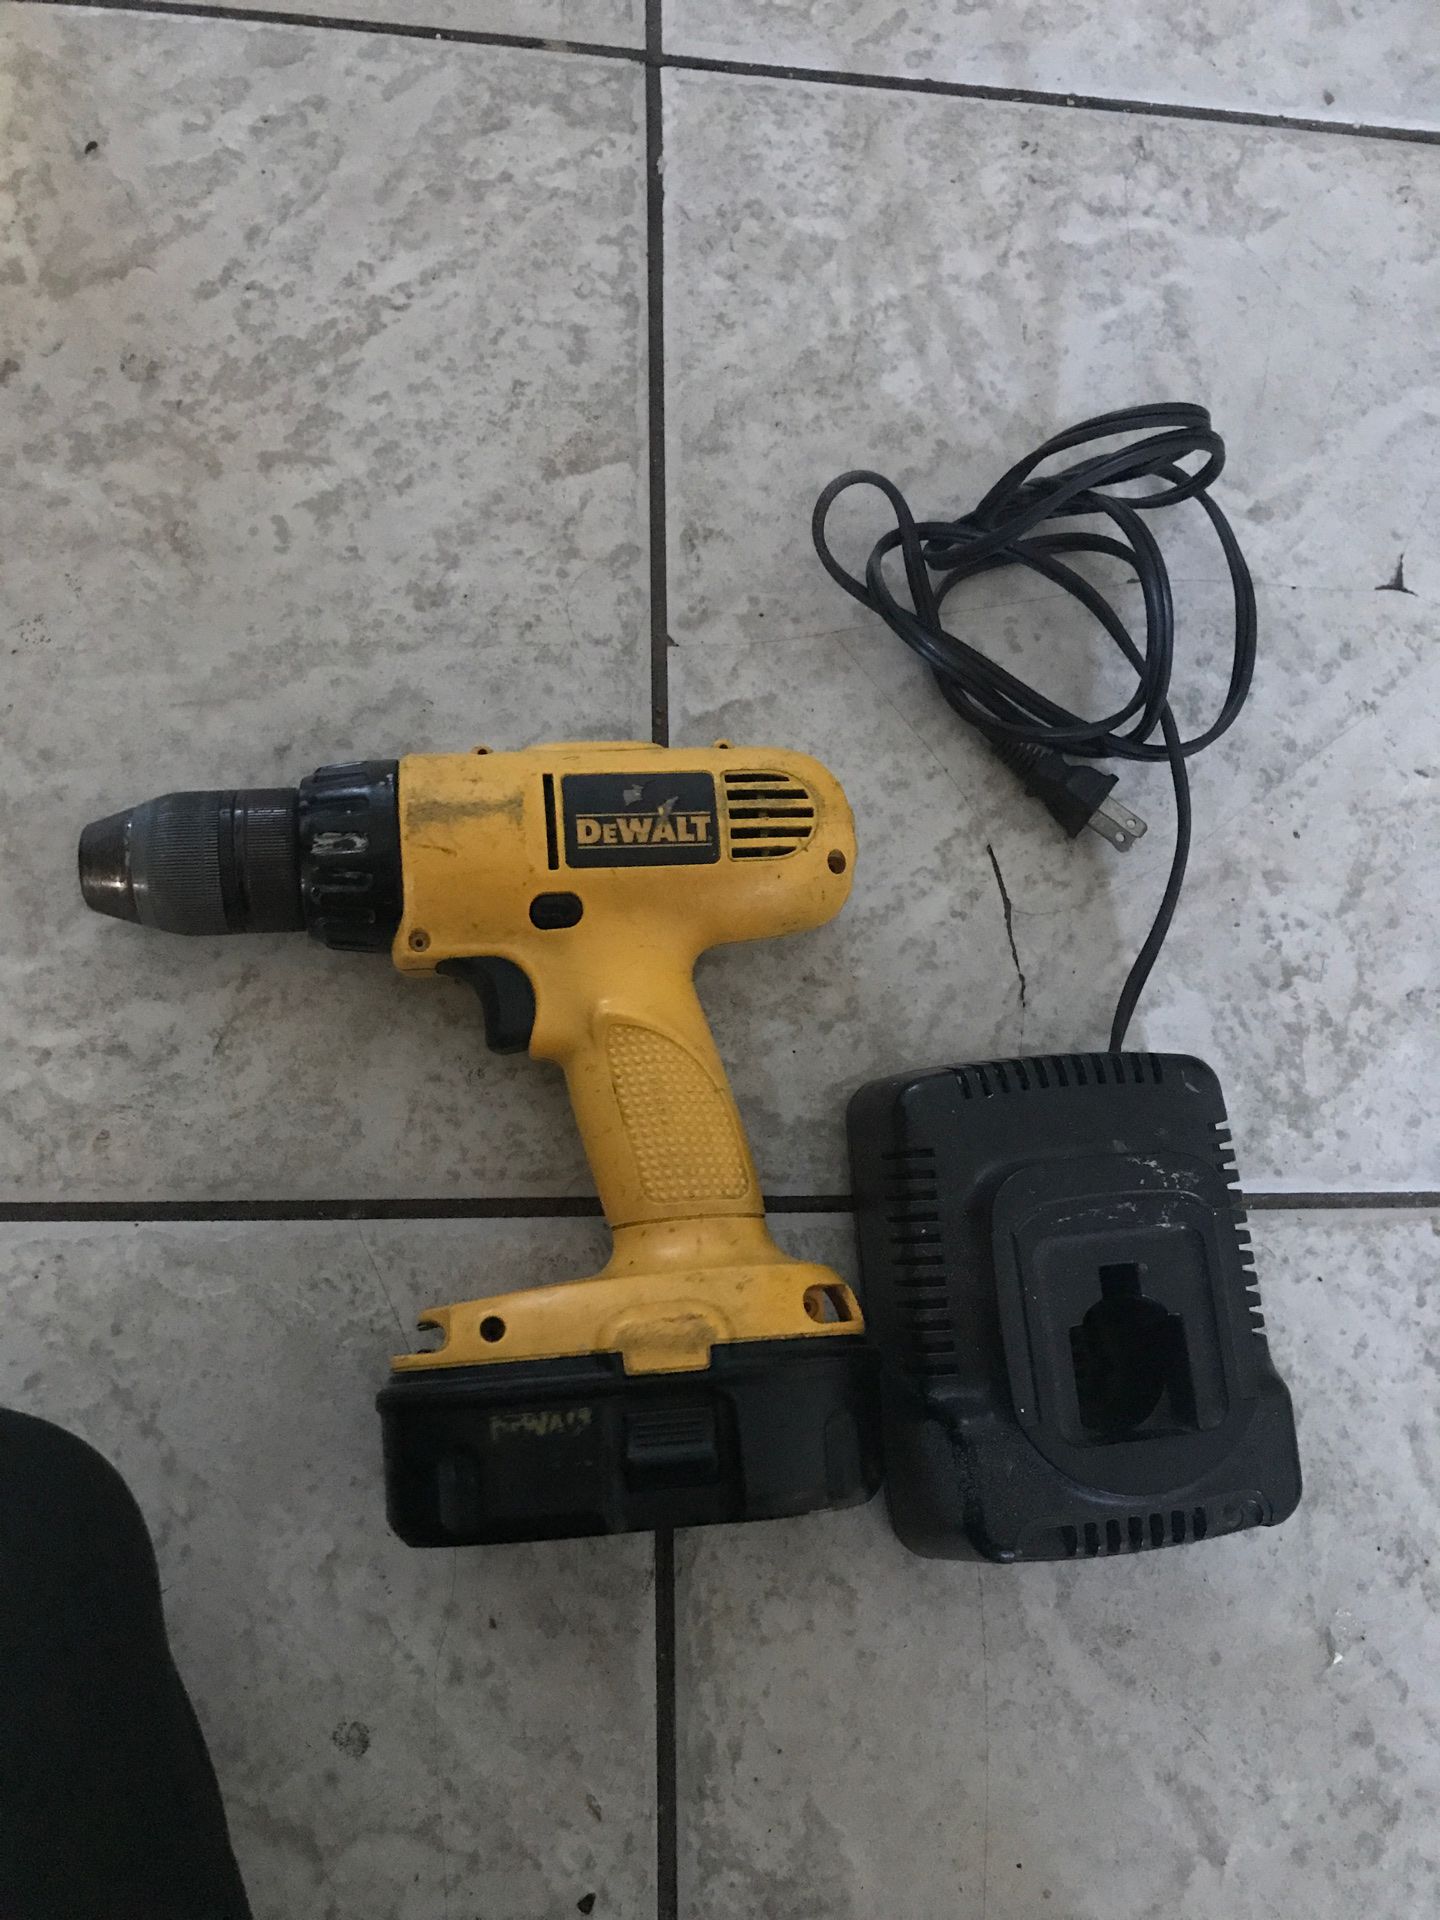 Dewalt 18v cordless drill with battery and charger